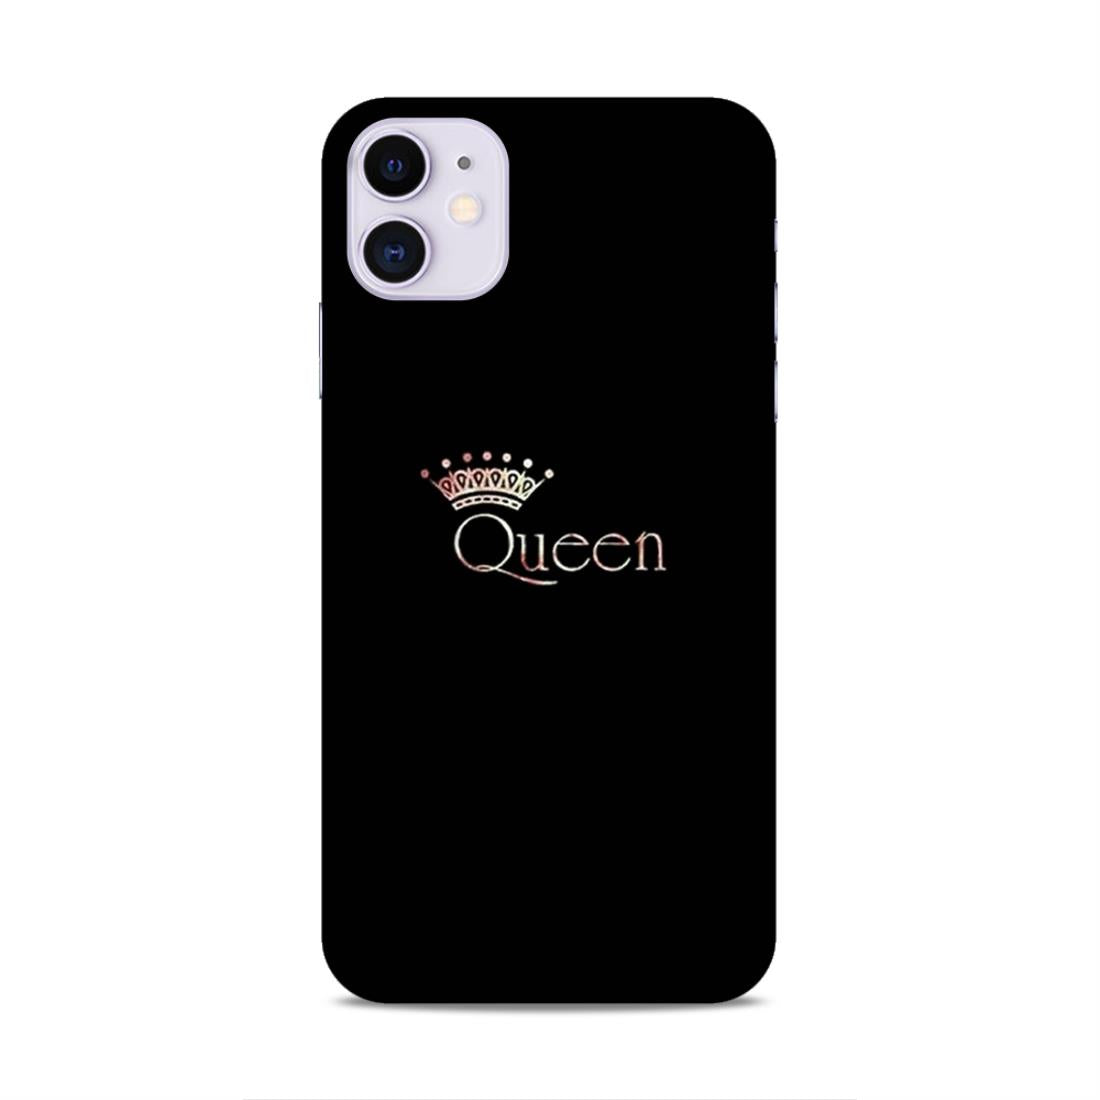 Queen Hard Back Case For Apple iPhone 11